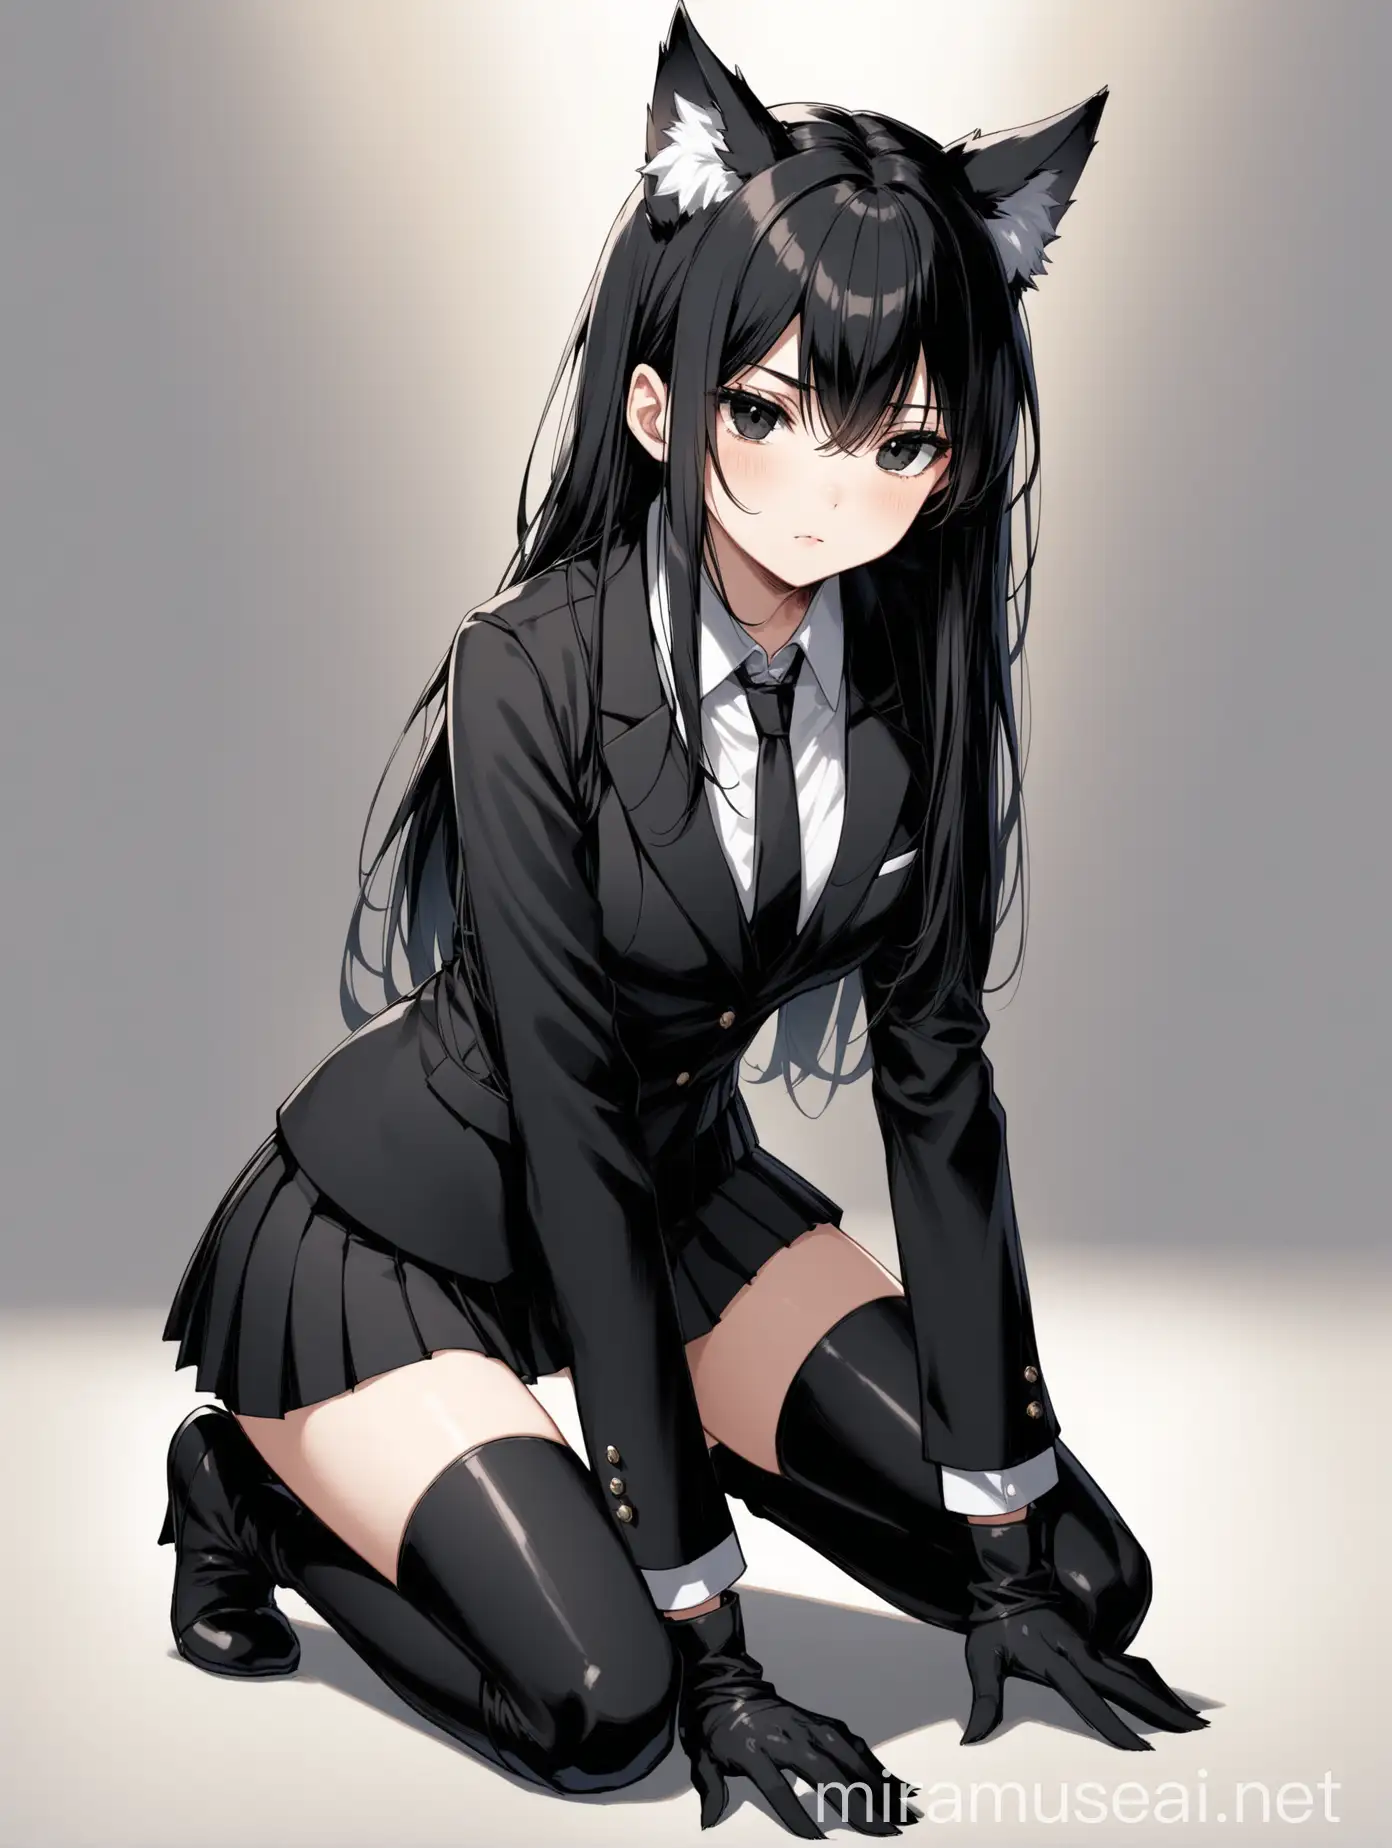 Tall Wolf Girl in Black Suit Kneeling with Neutral Expression